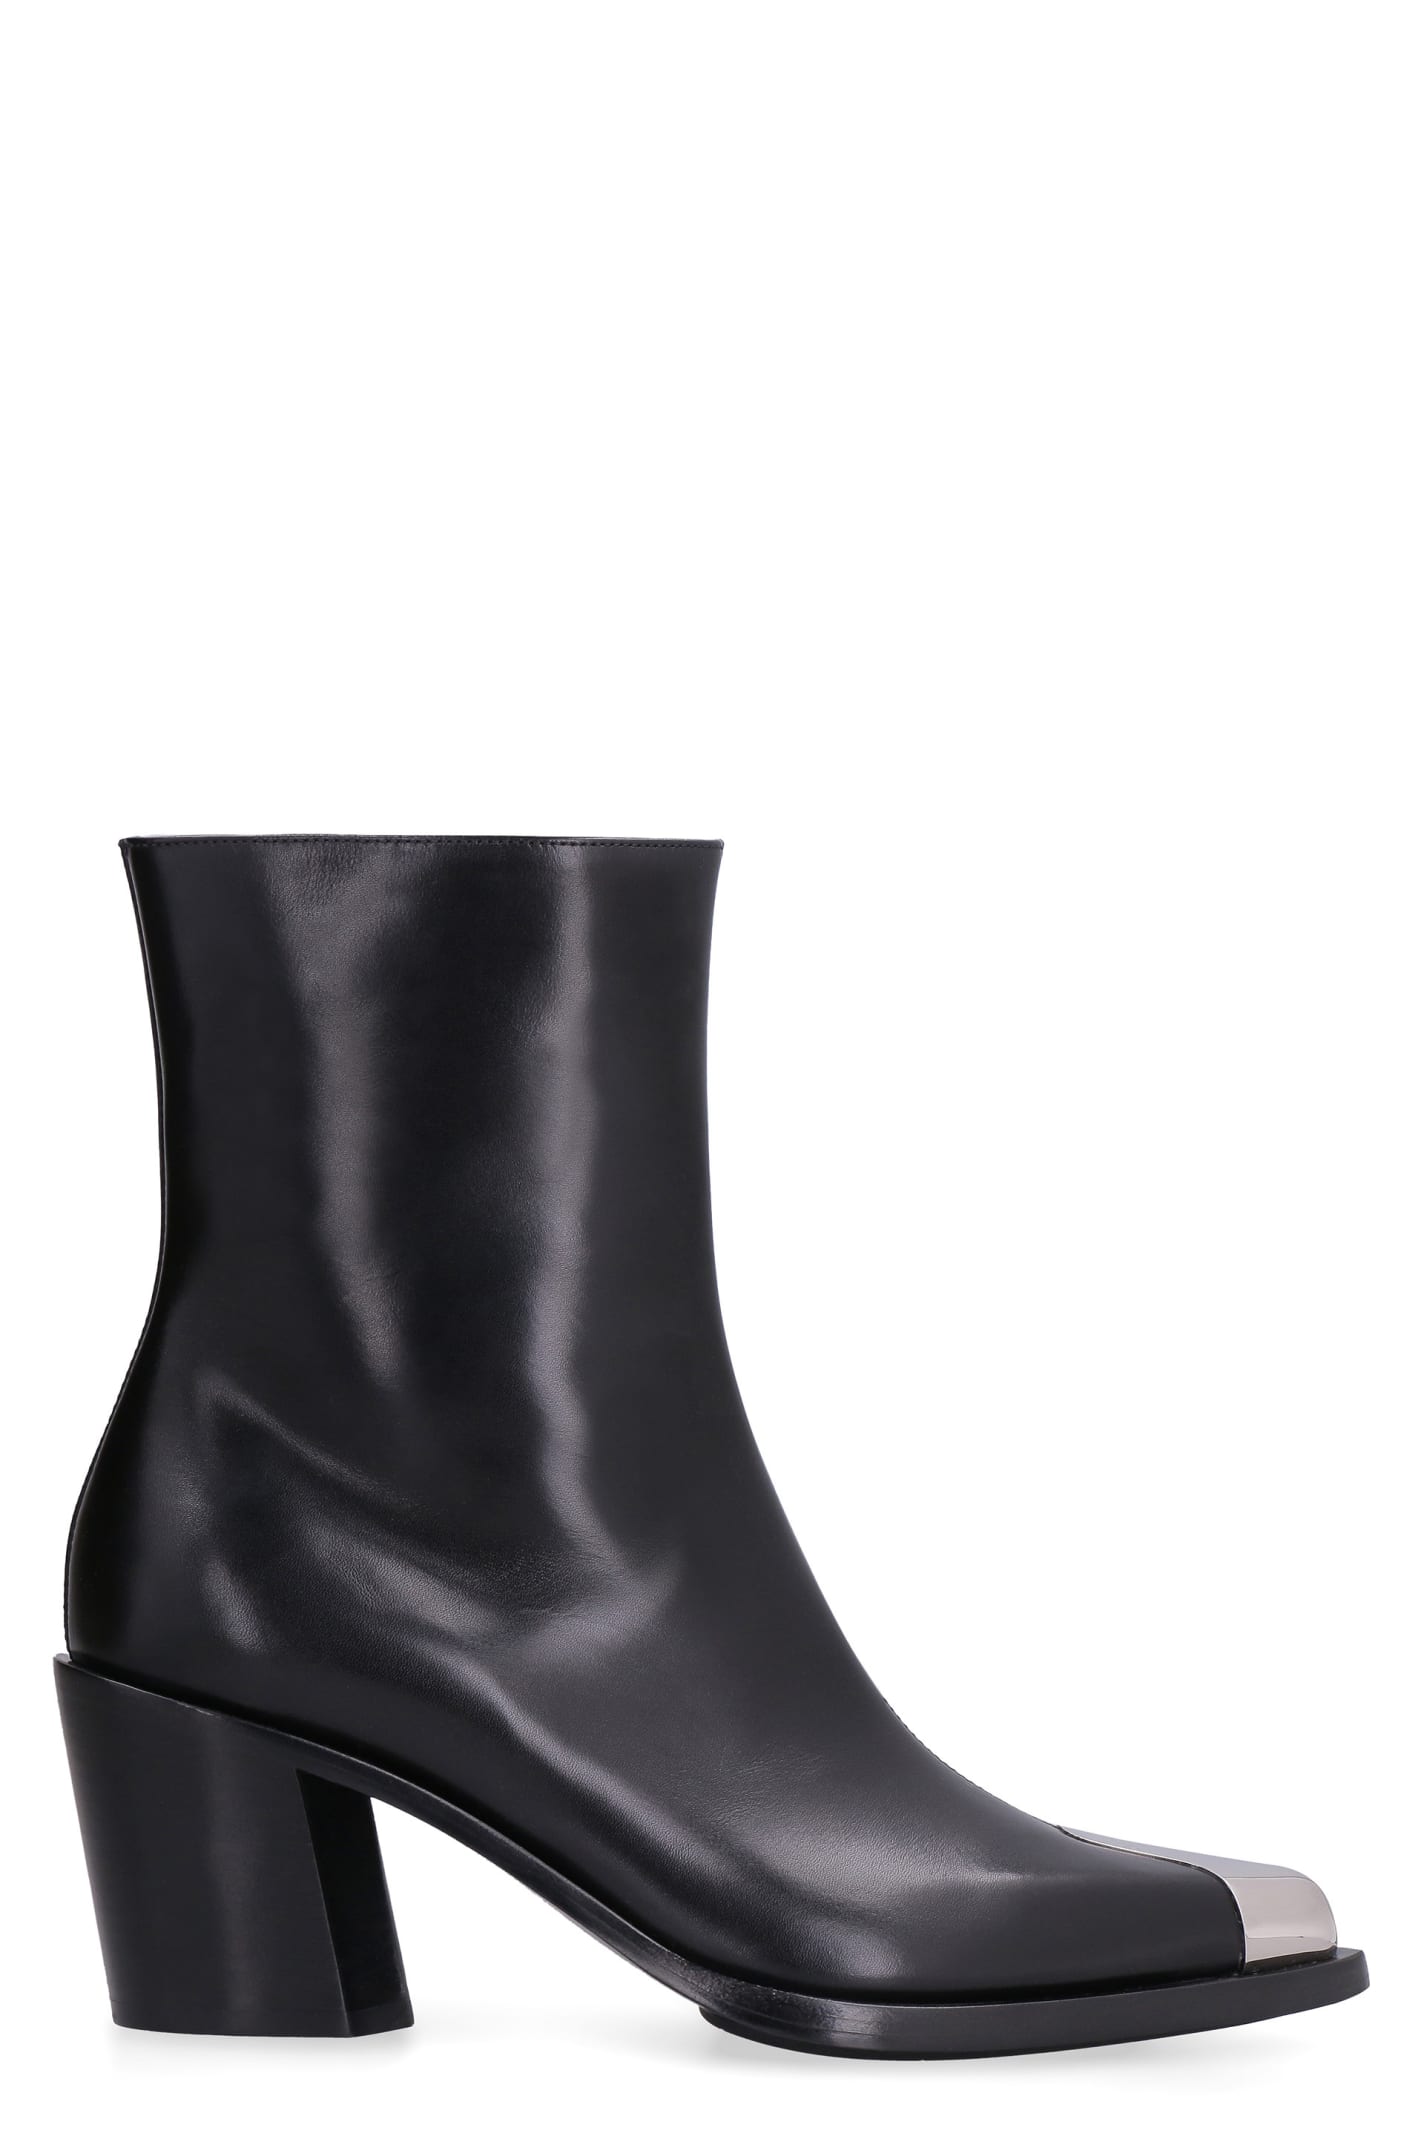 Alexander McQueen Punk Leather Ankle Boots